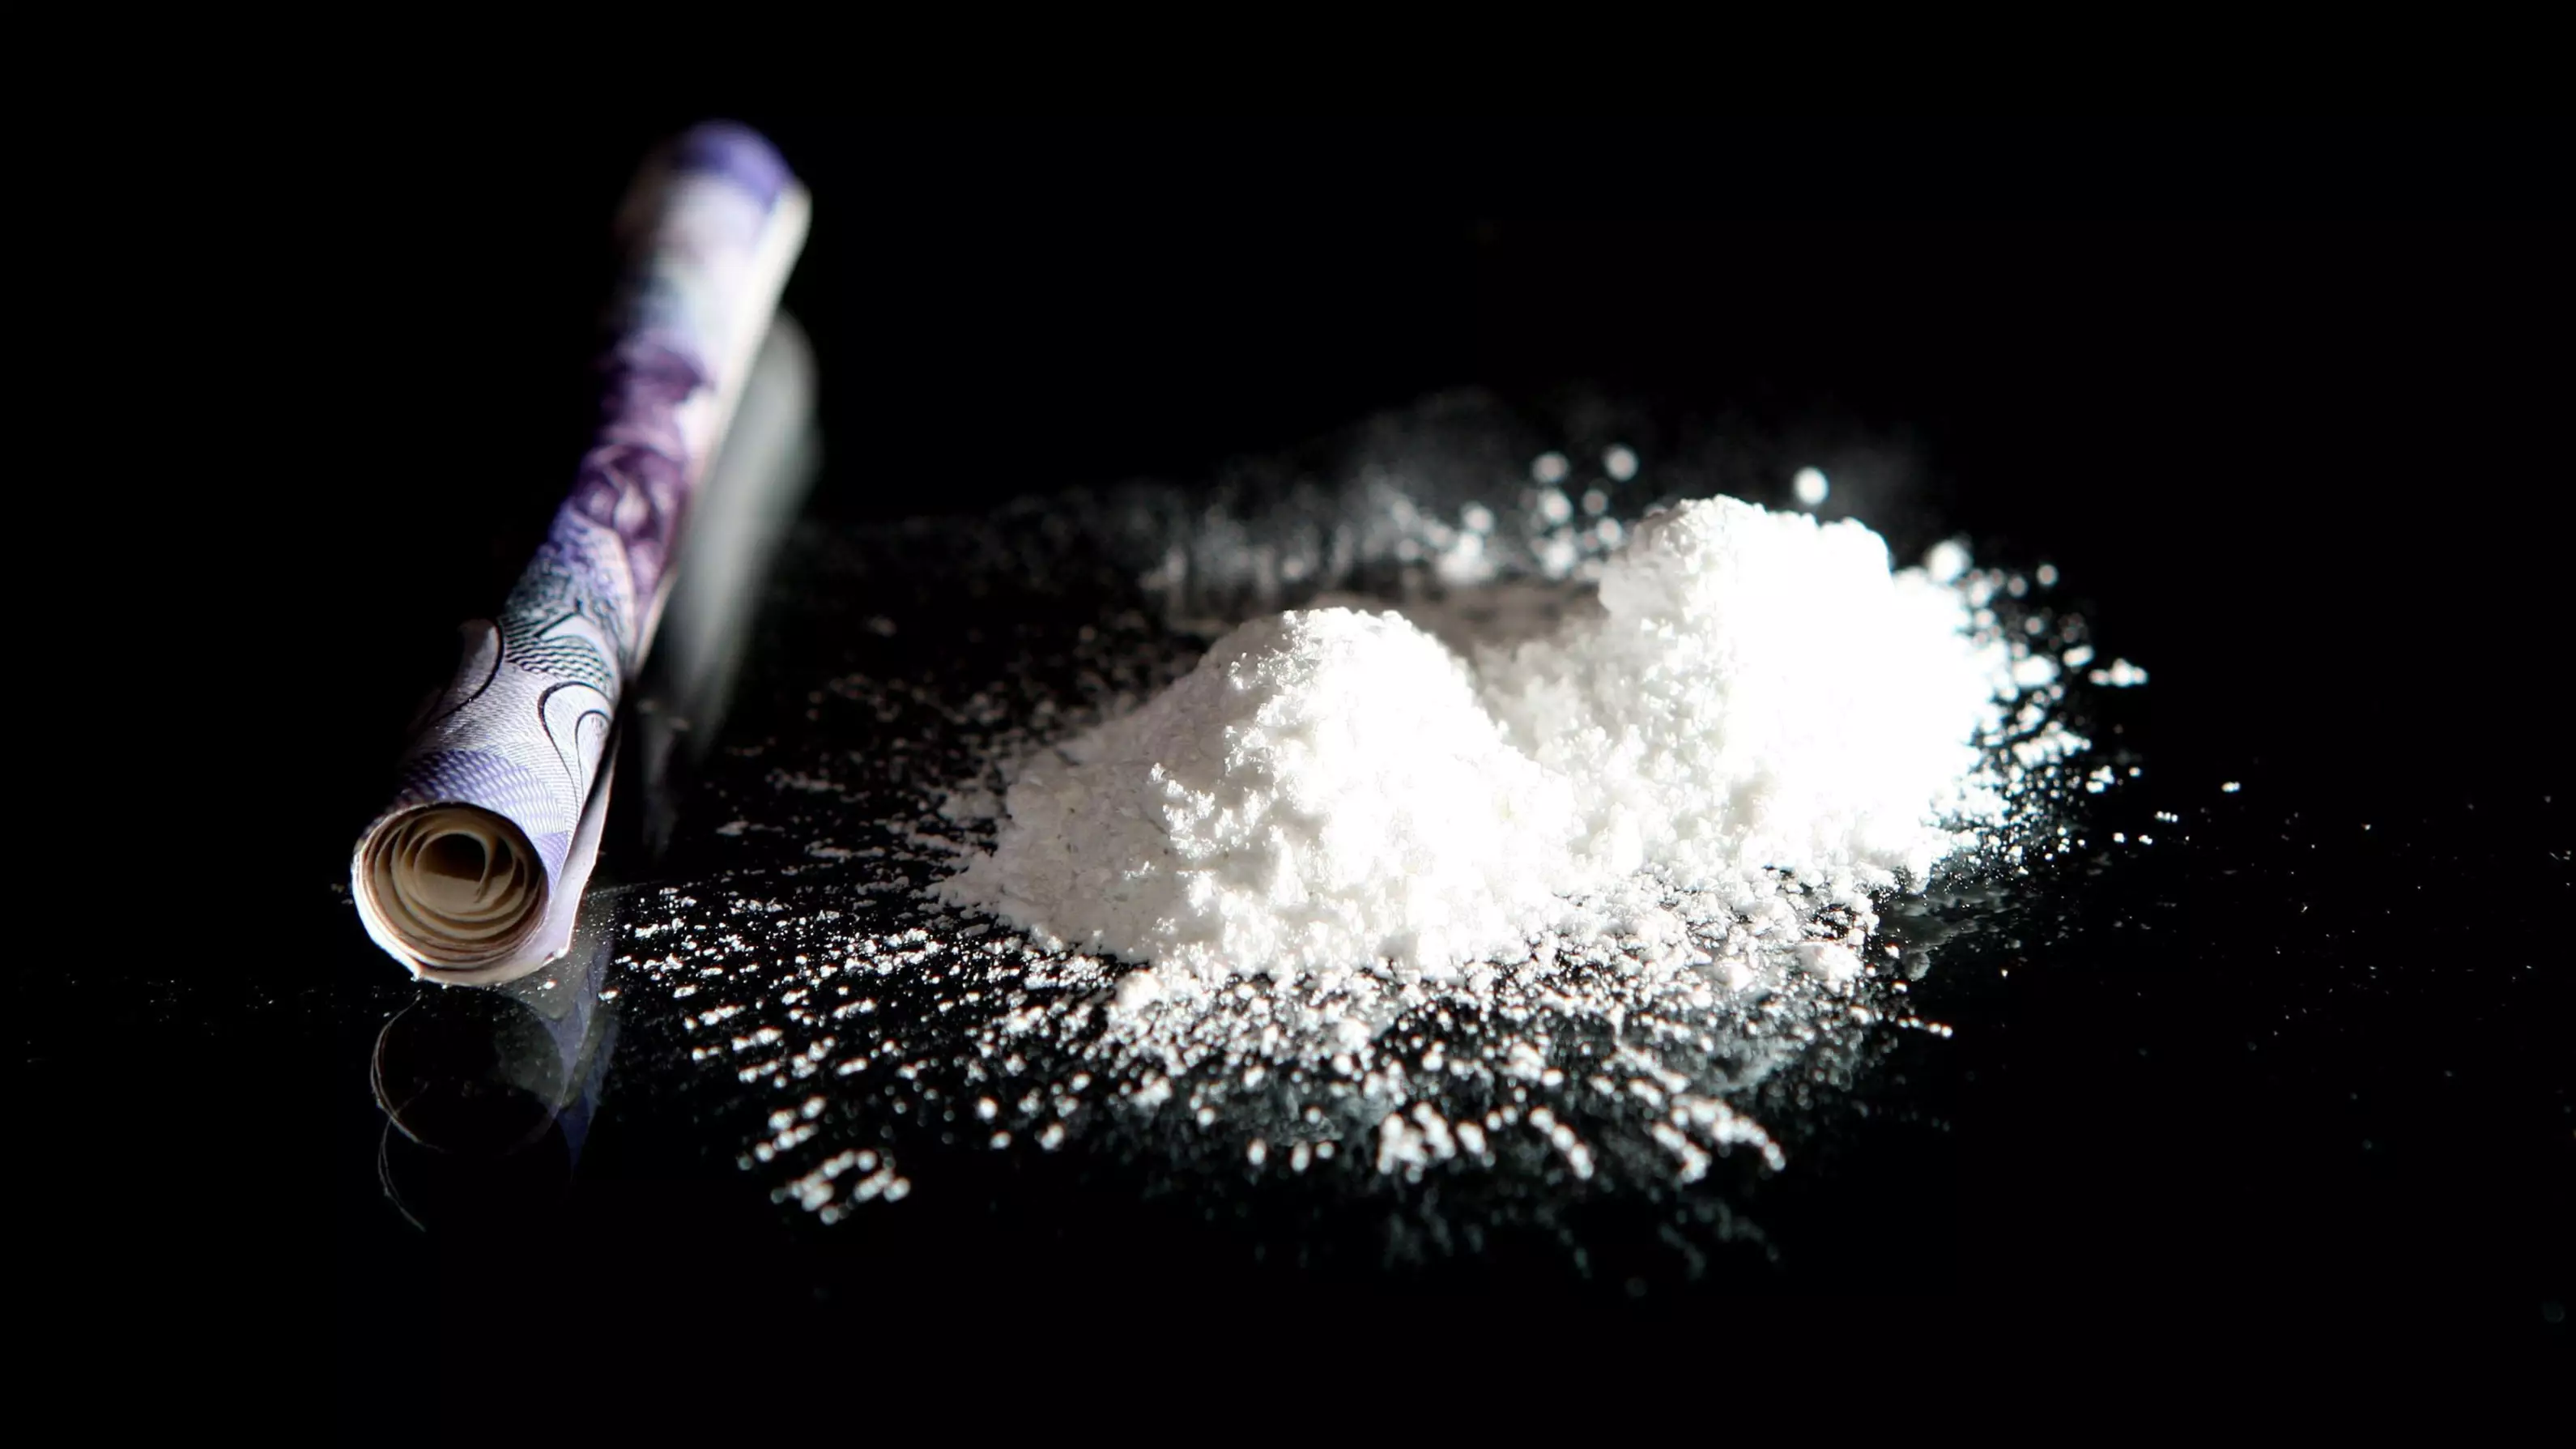 Price Of Cocaine Jumps In Australia Due To Exiled Gang Member's 'Mafia-Style' Tax